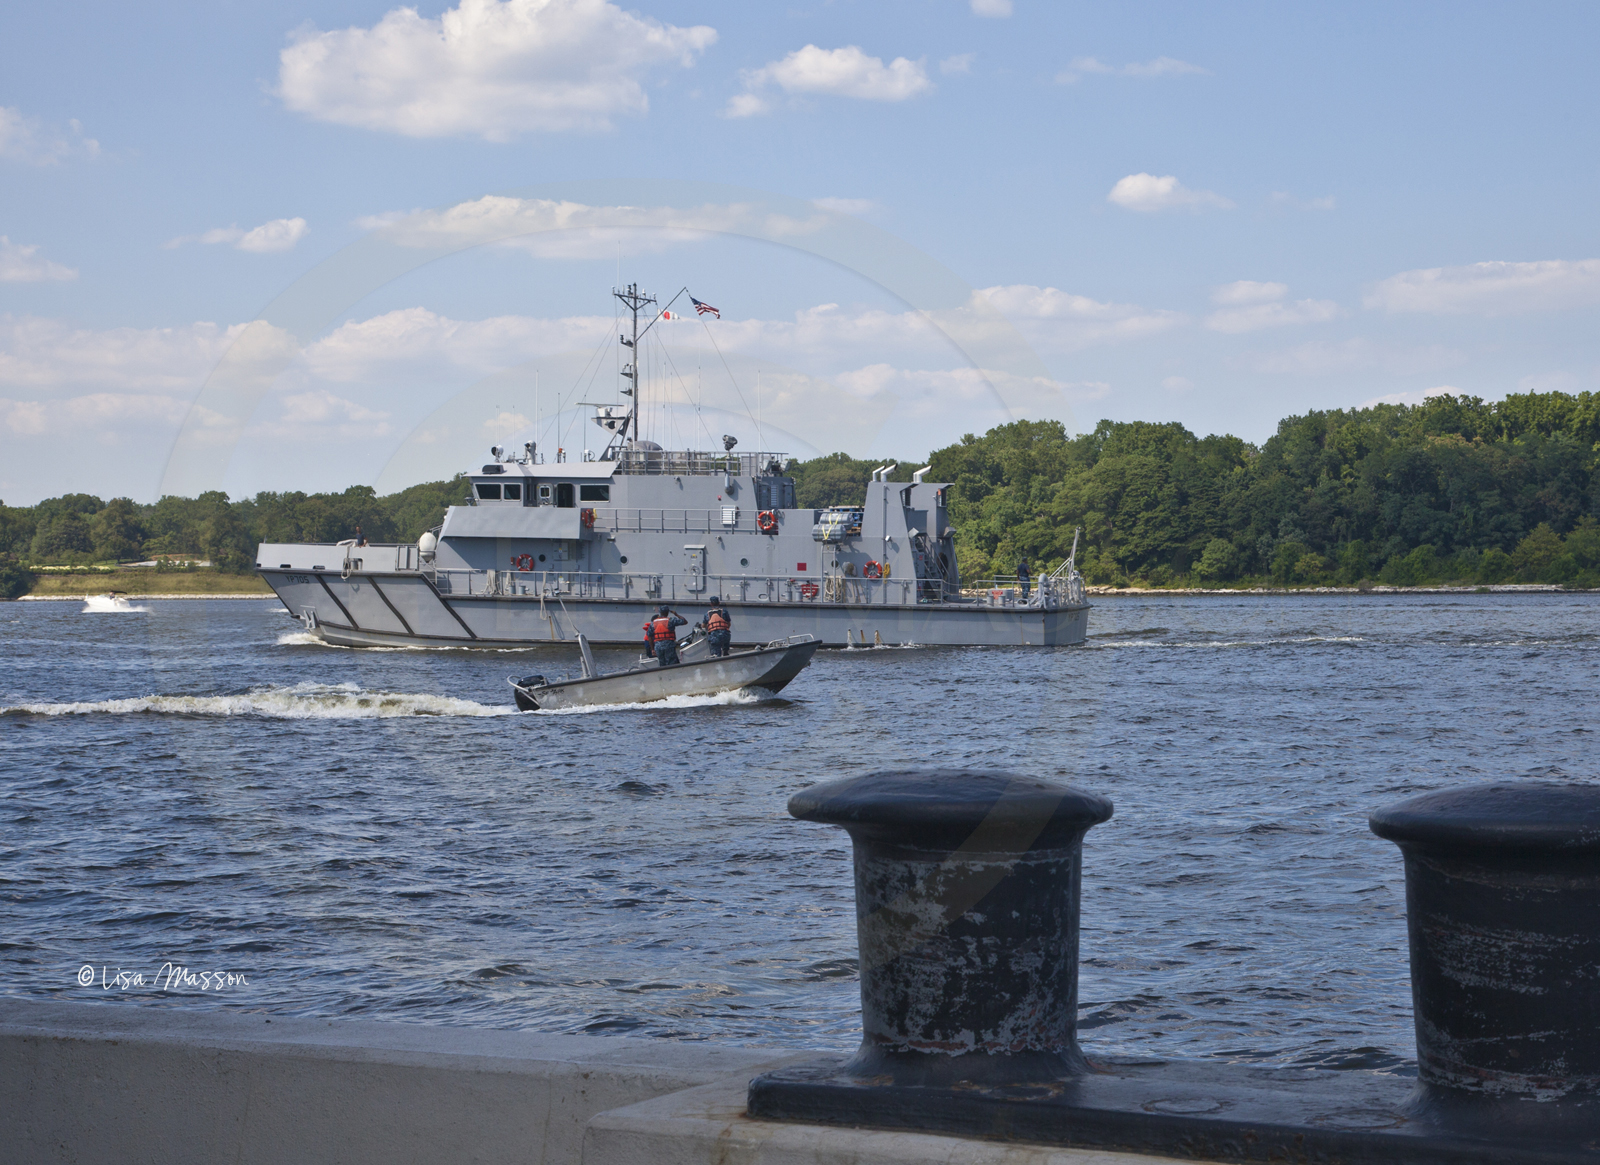 54 USNA YP on Water 6602©